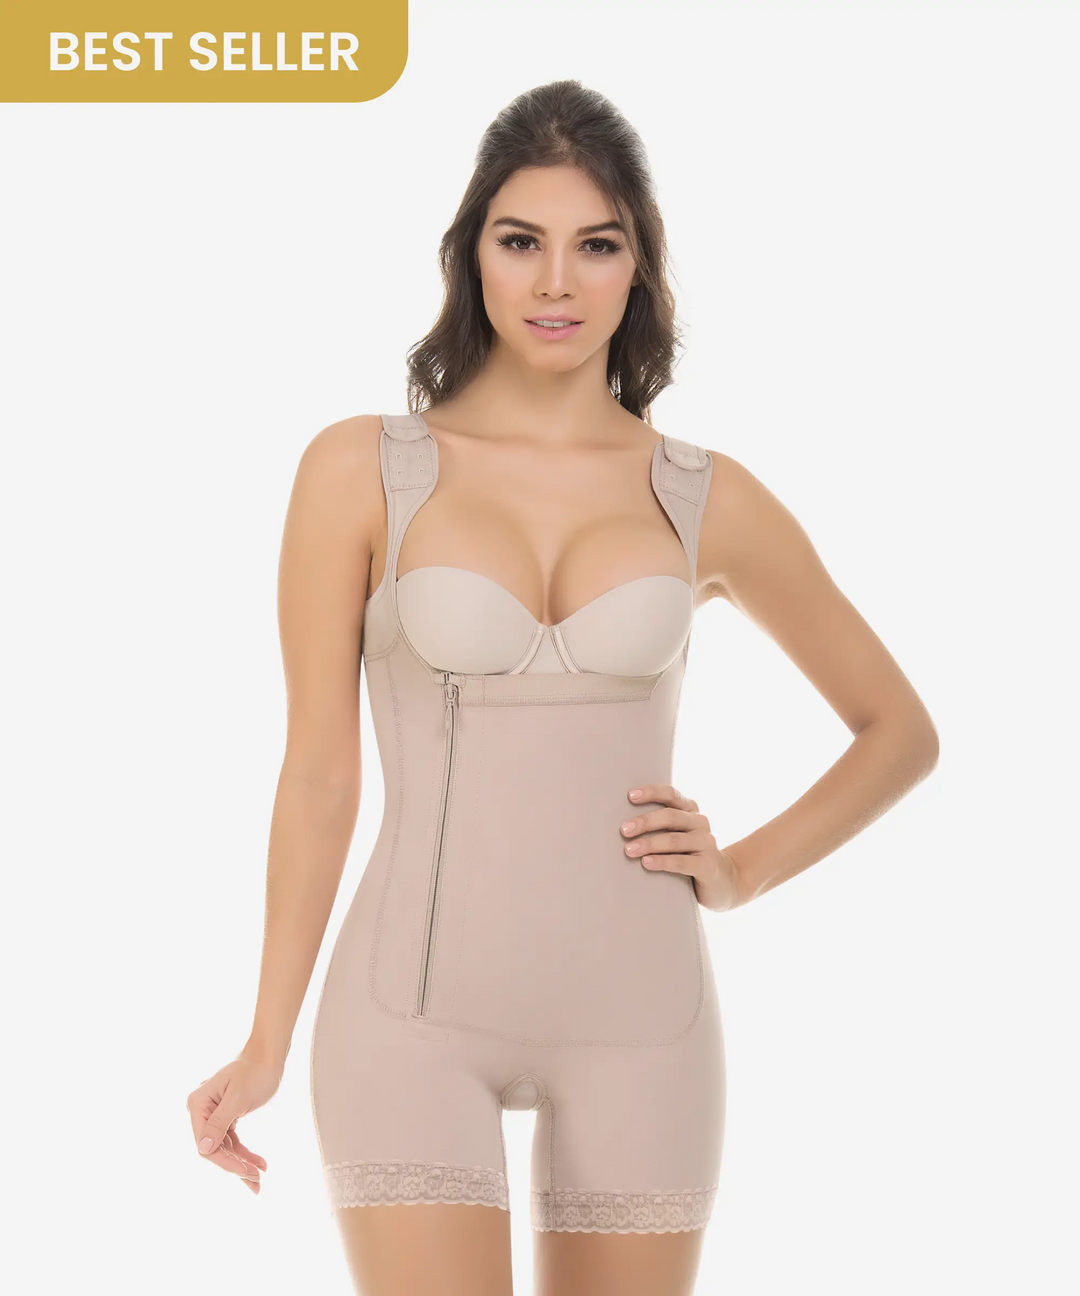 Shapewear for Petite Women - Create your desired curves